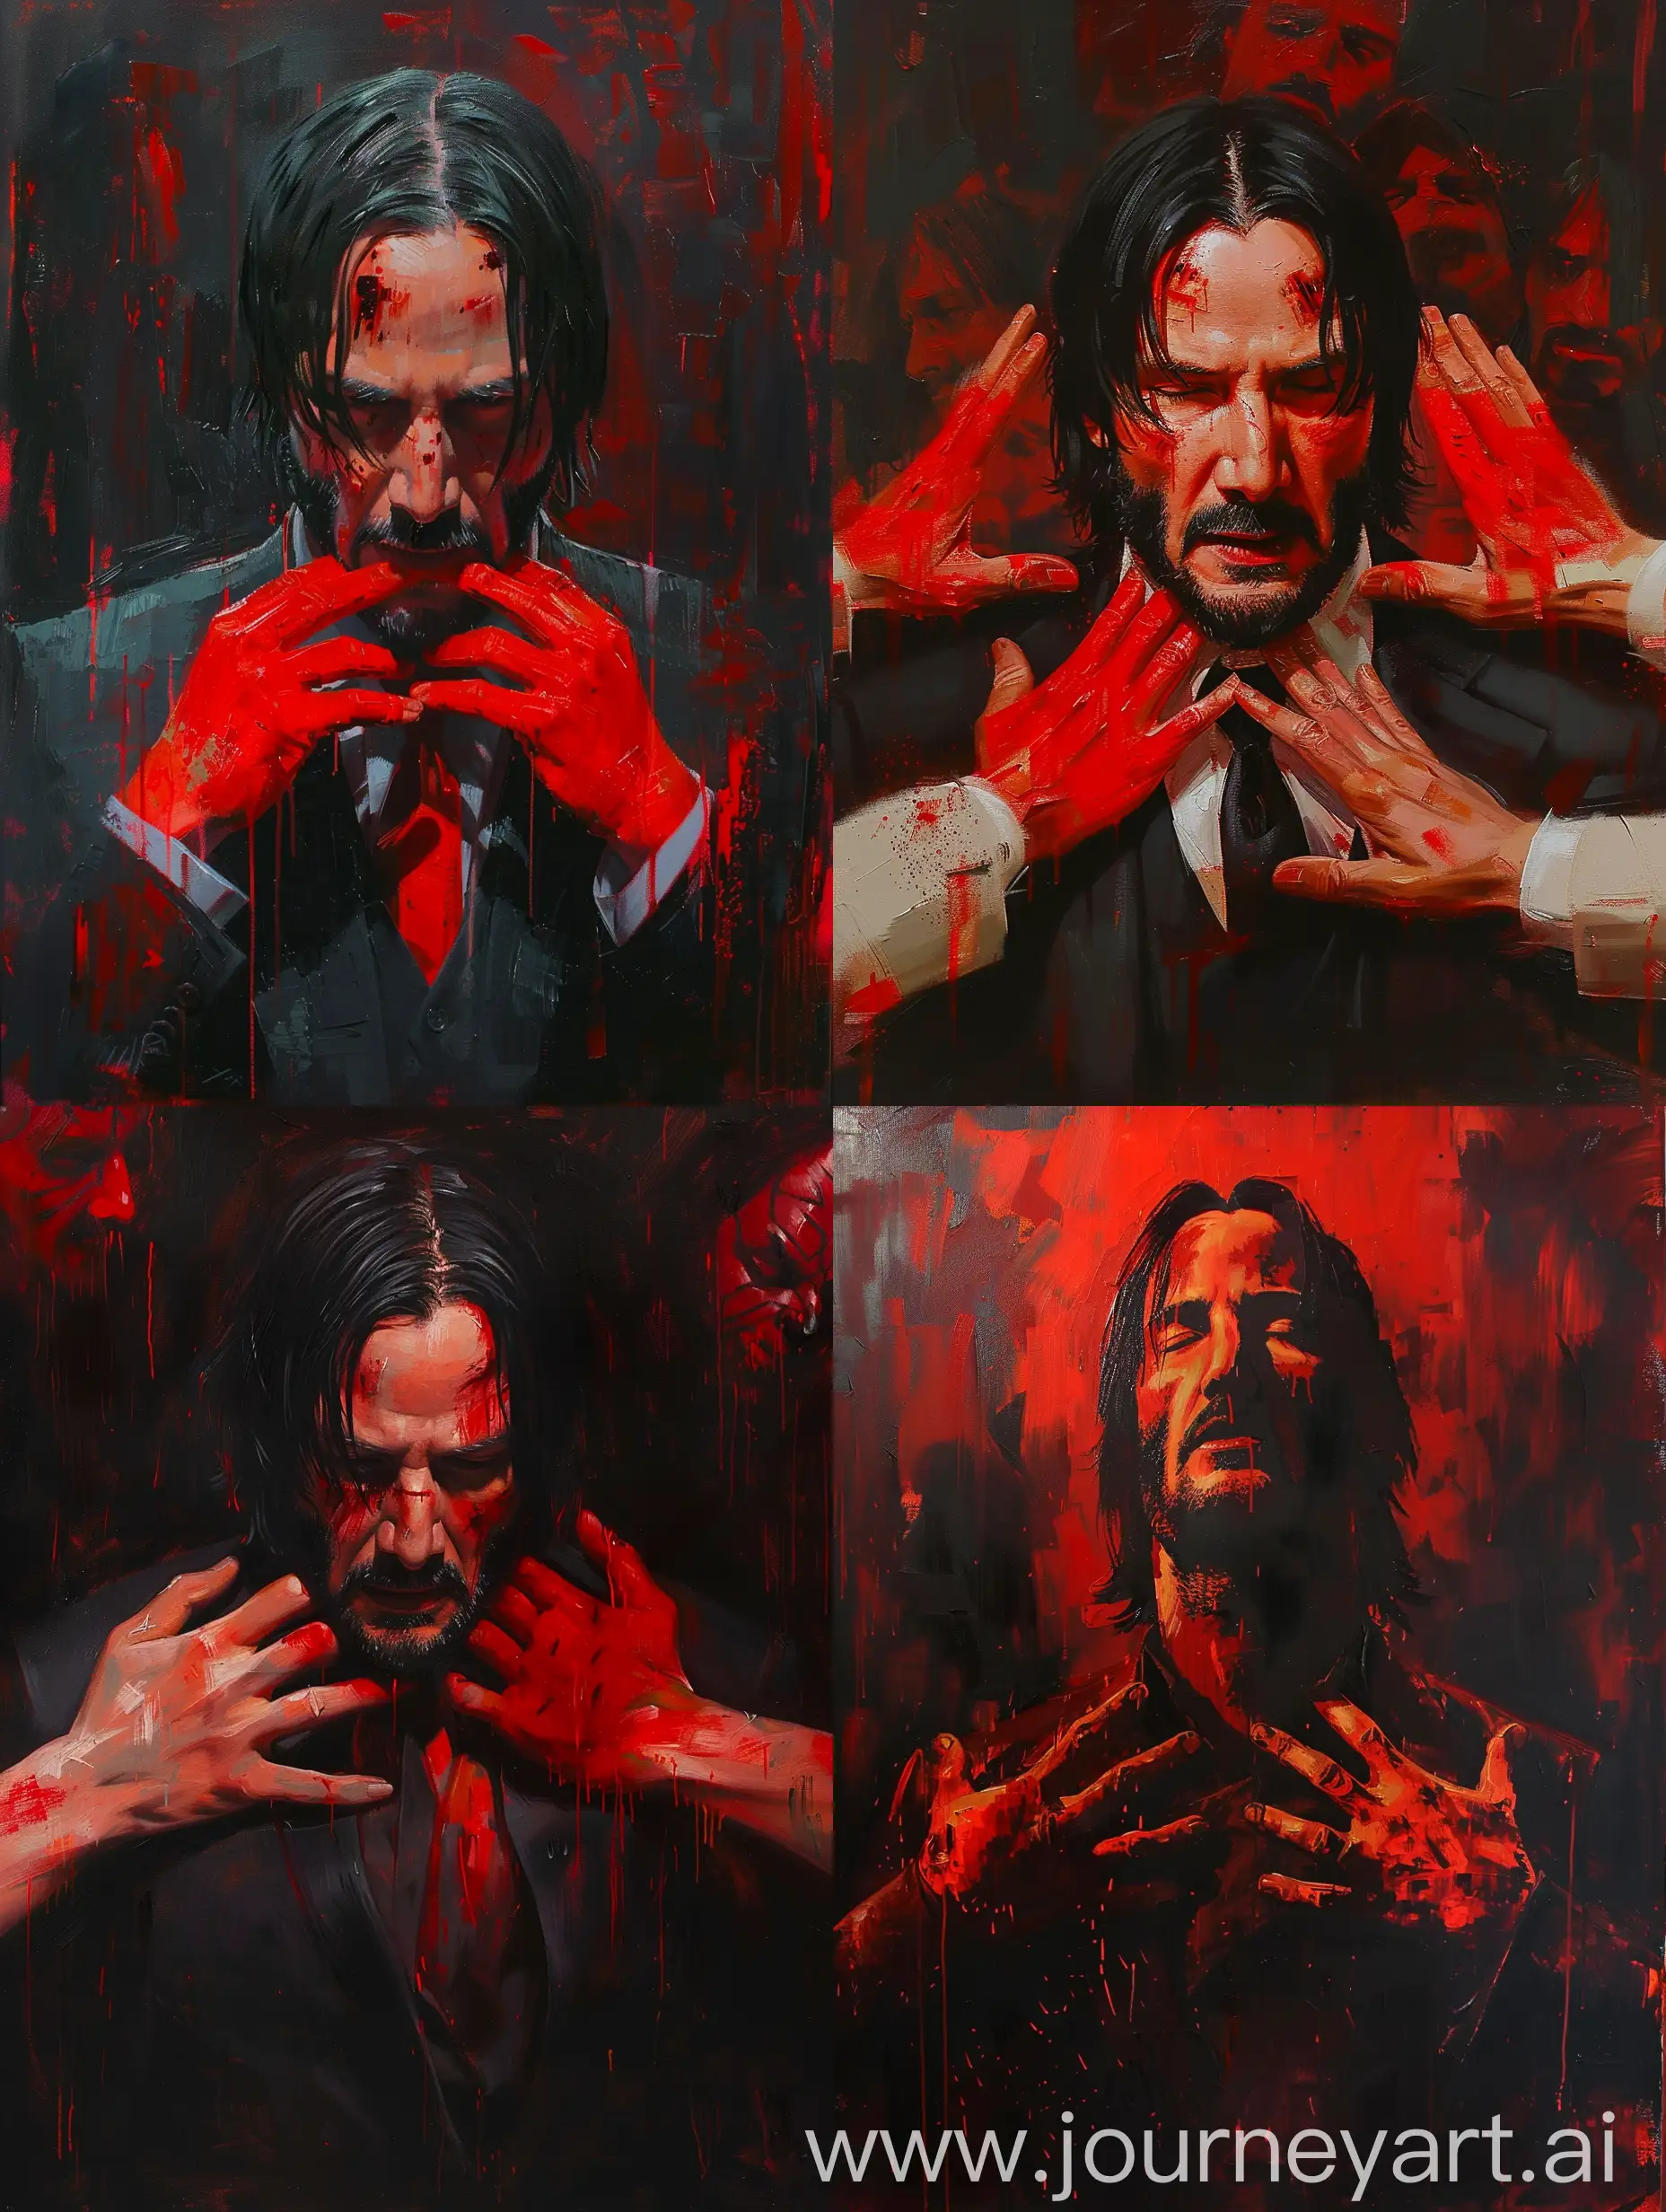 John-Wick-in-Star-Wars-Style-Oil-Painting-with-Red-Hands-Conceptual-Art